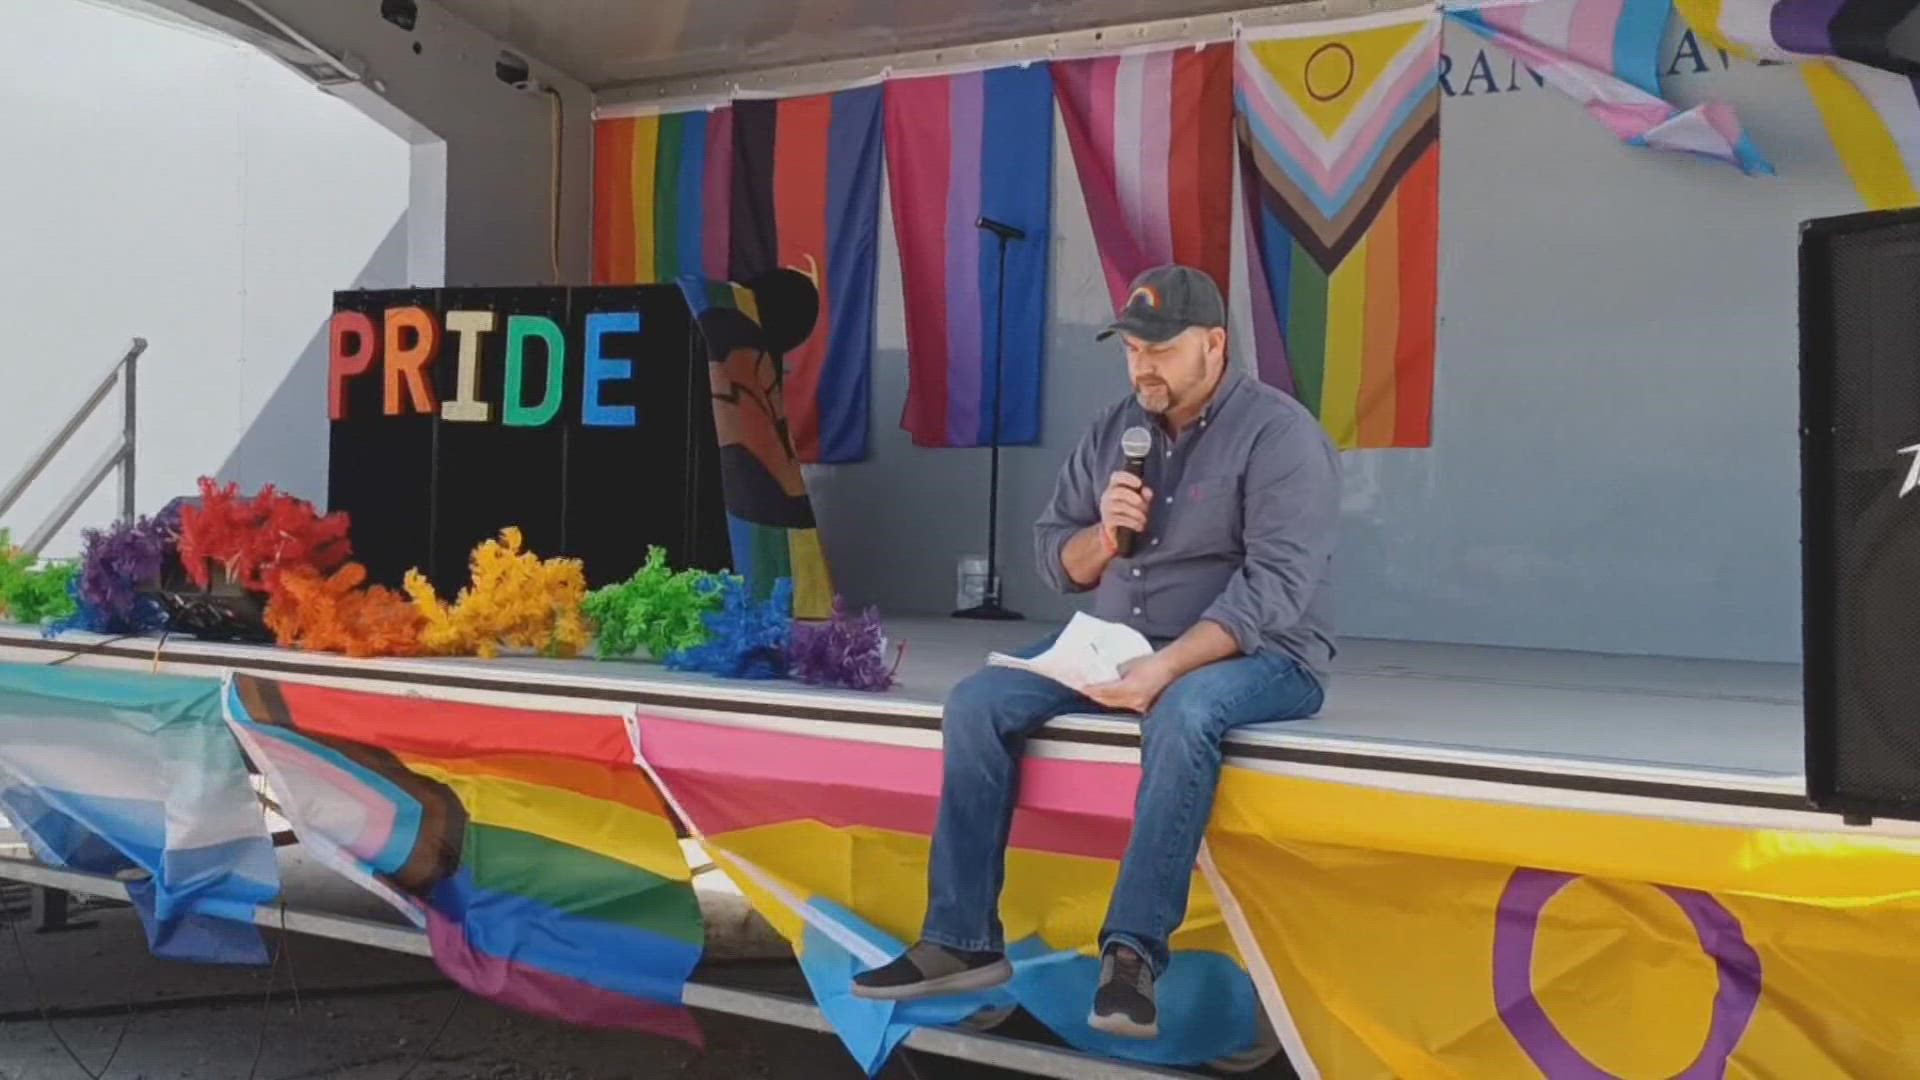 'It's never too late' Muskegon man shares story of coming out at 49